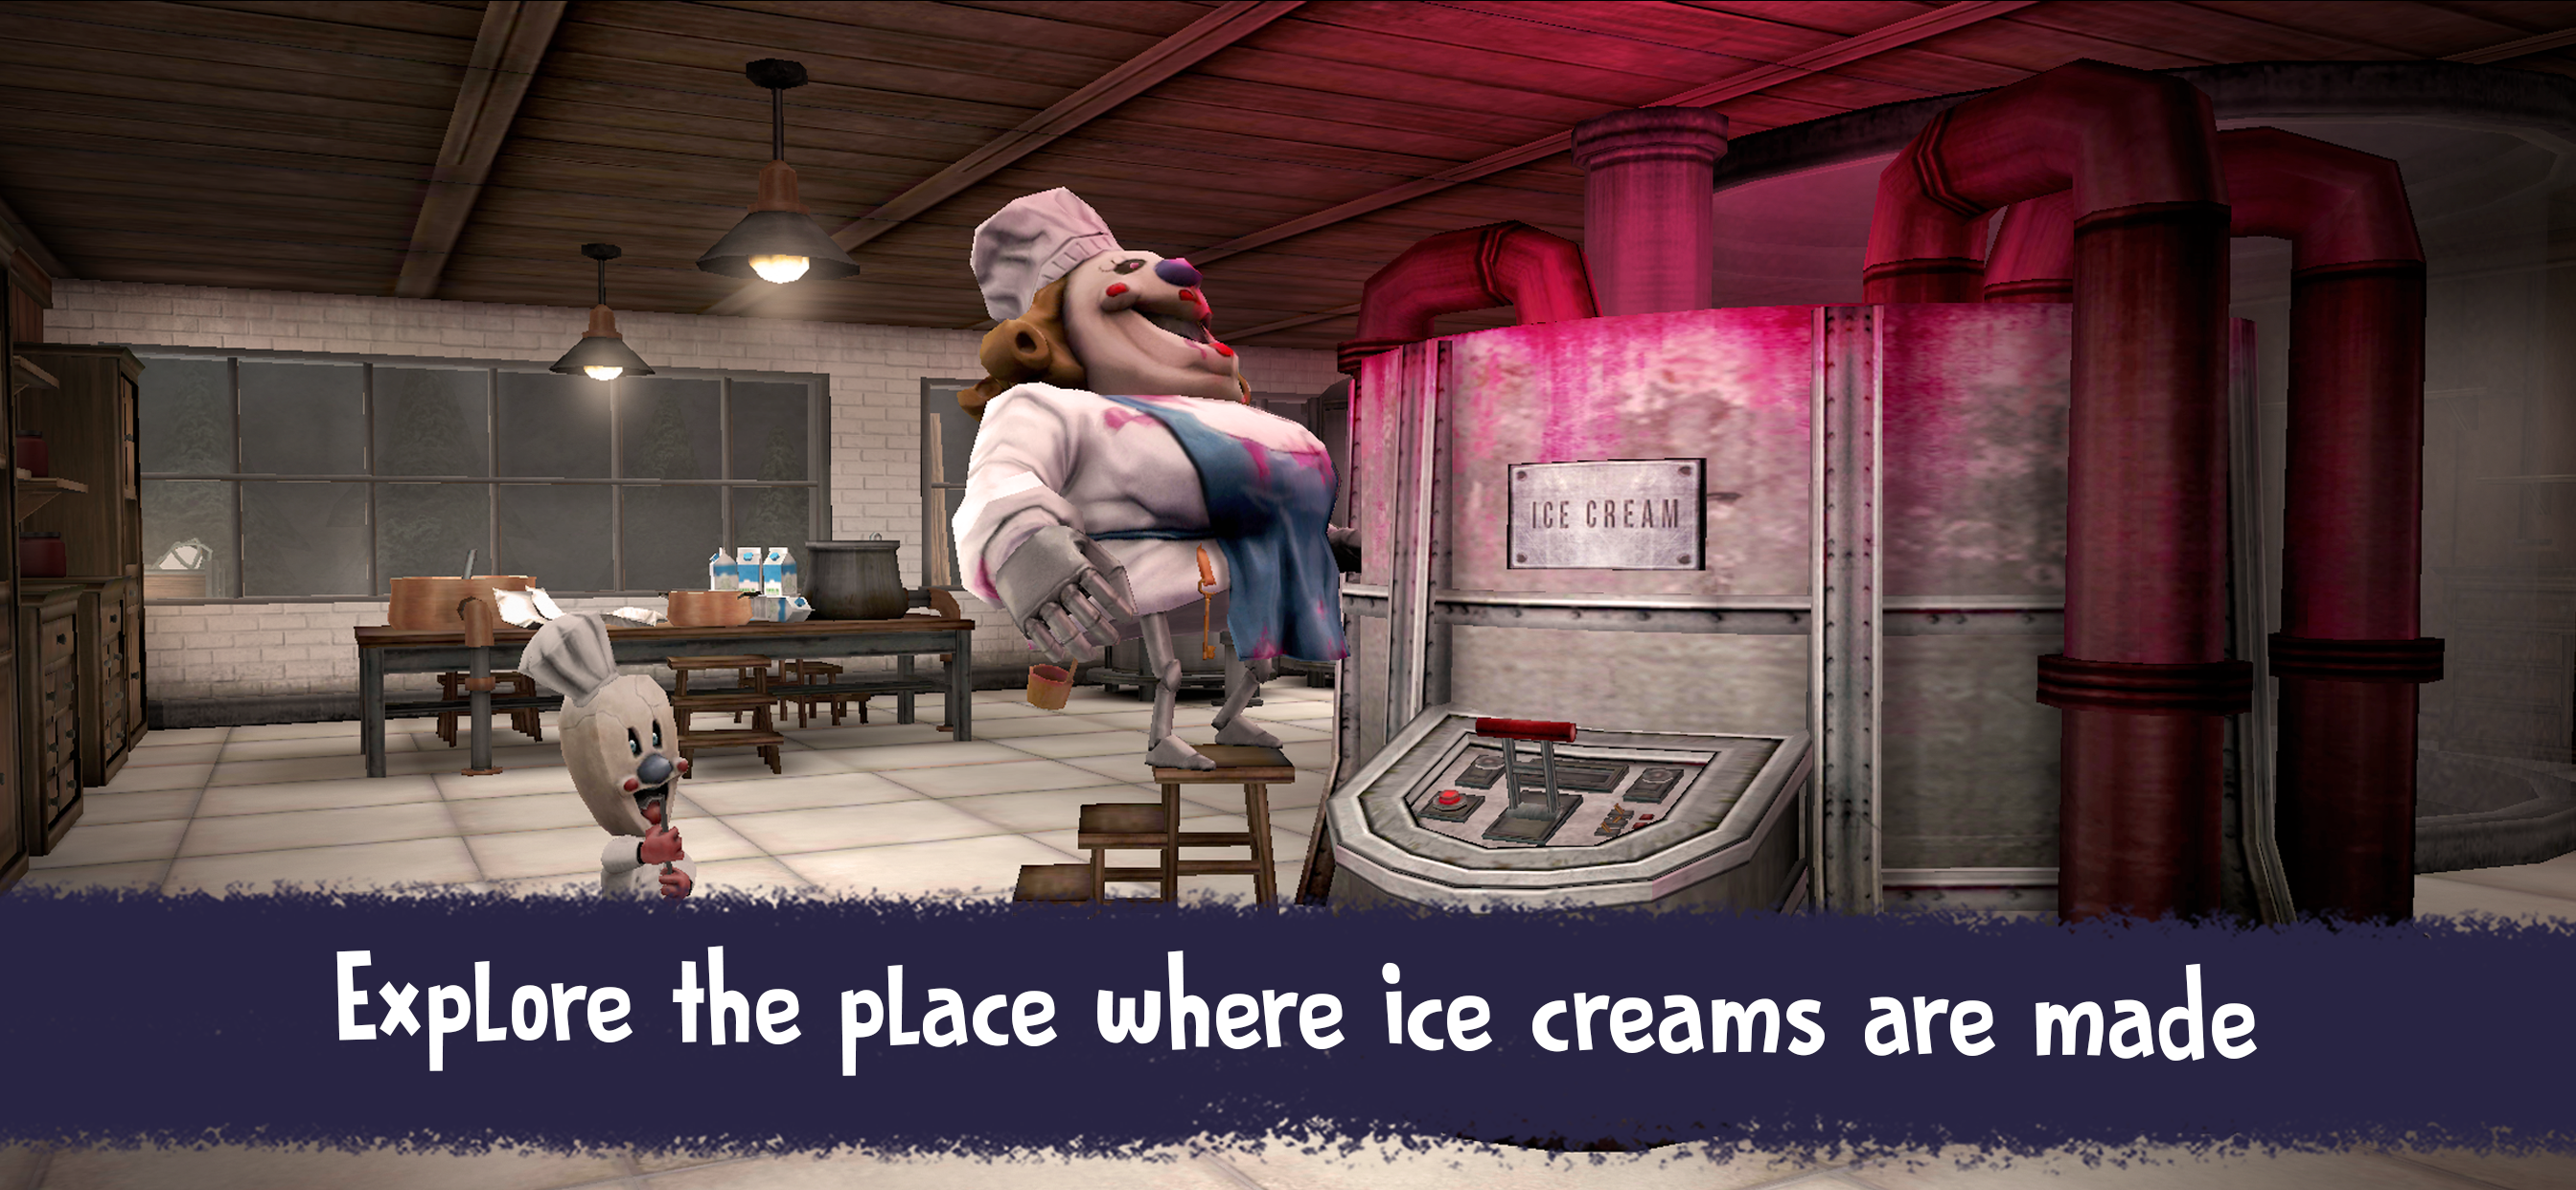 Ice Scream 3 for Android - Download the APK from Uptodown